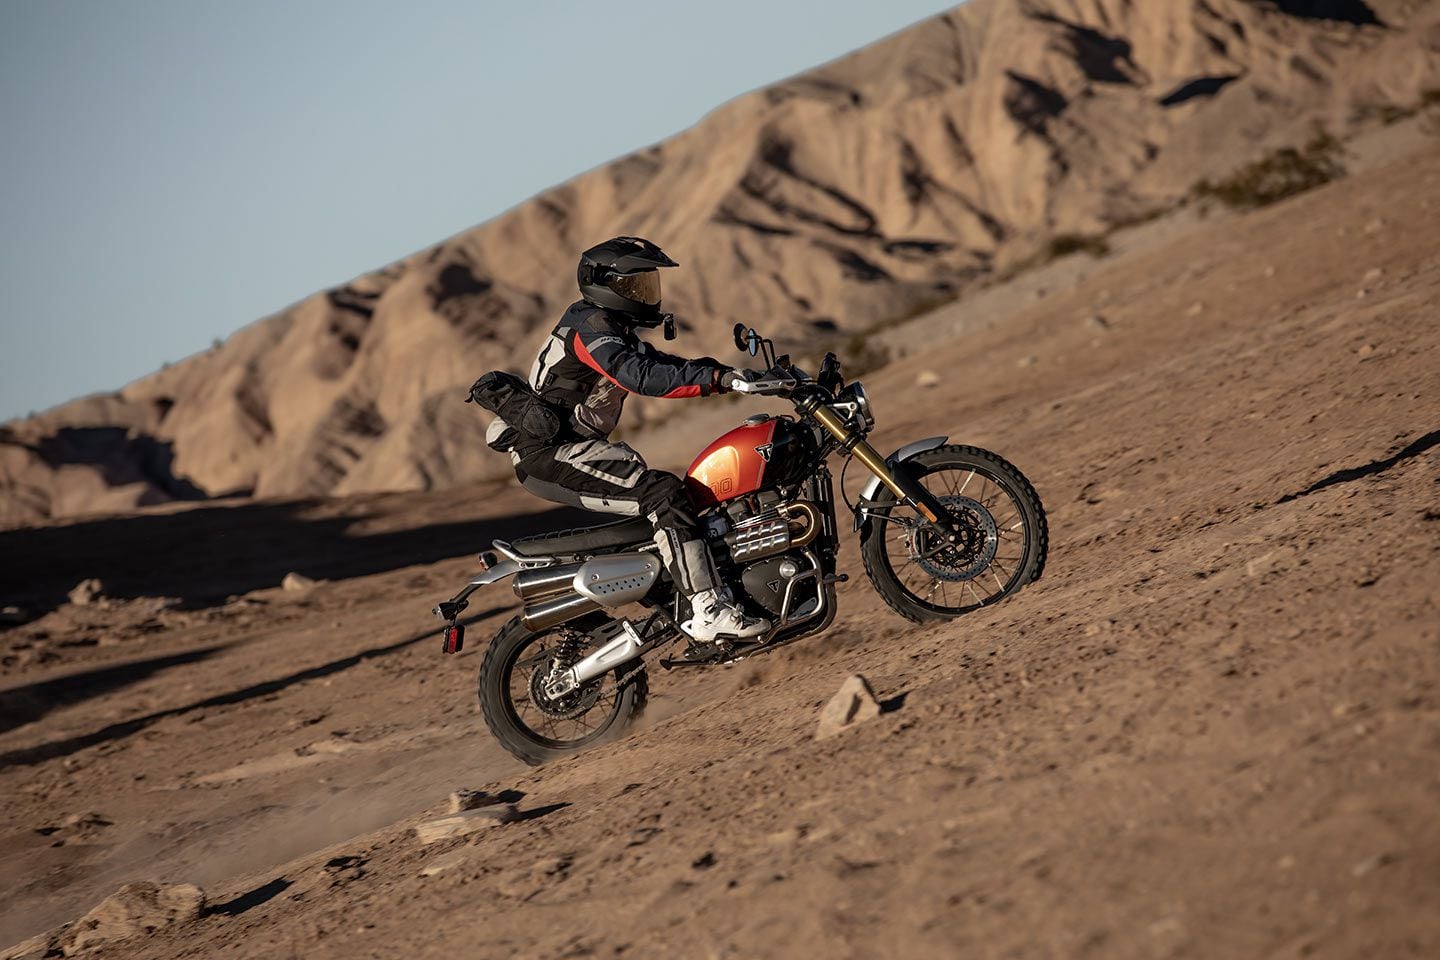 The Scrambler 1200 XE’s ergonomics are well throughout and it is capable and relatively easy to ride in the dirt and on the road.